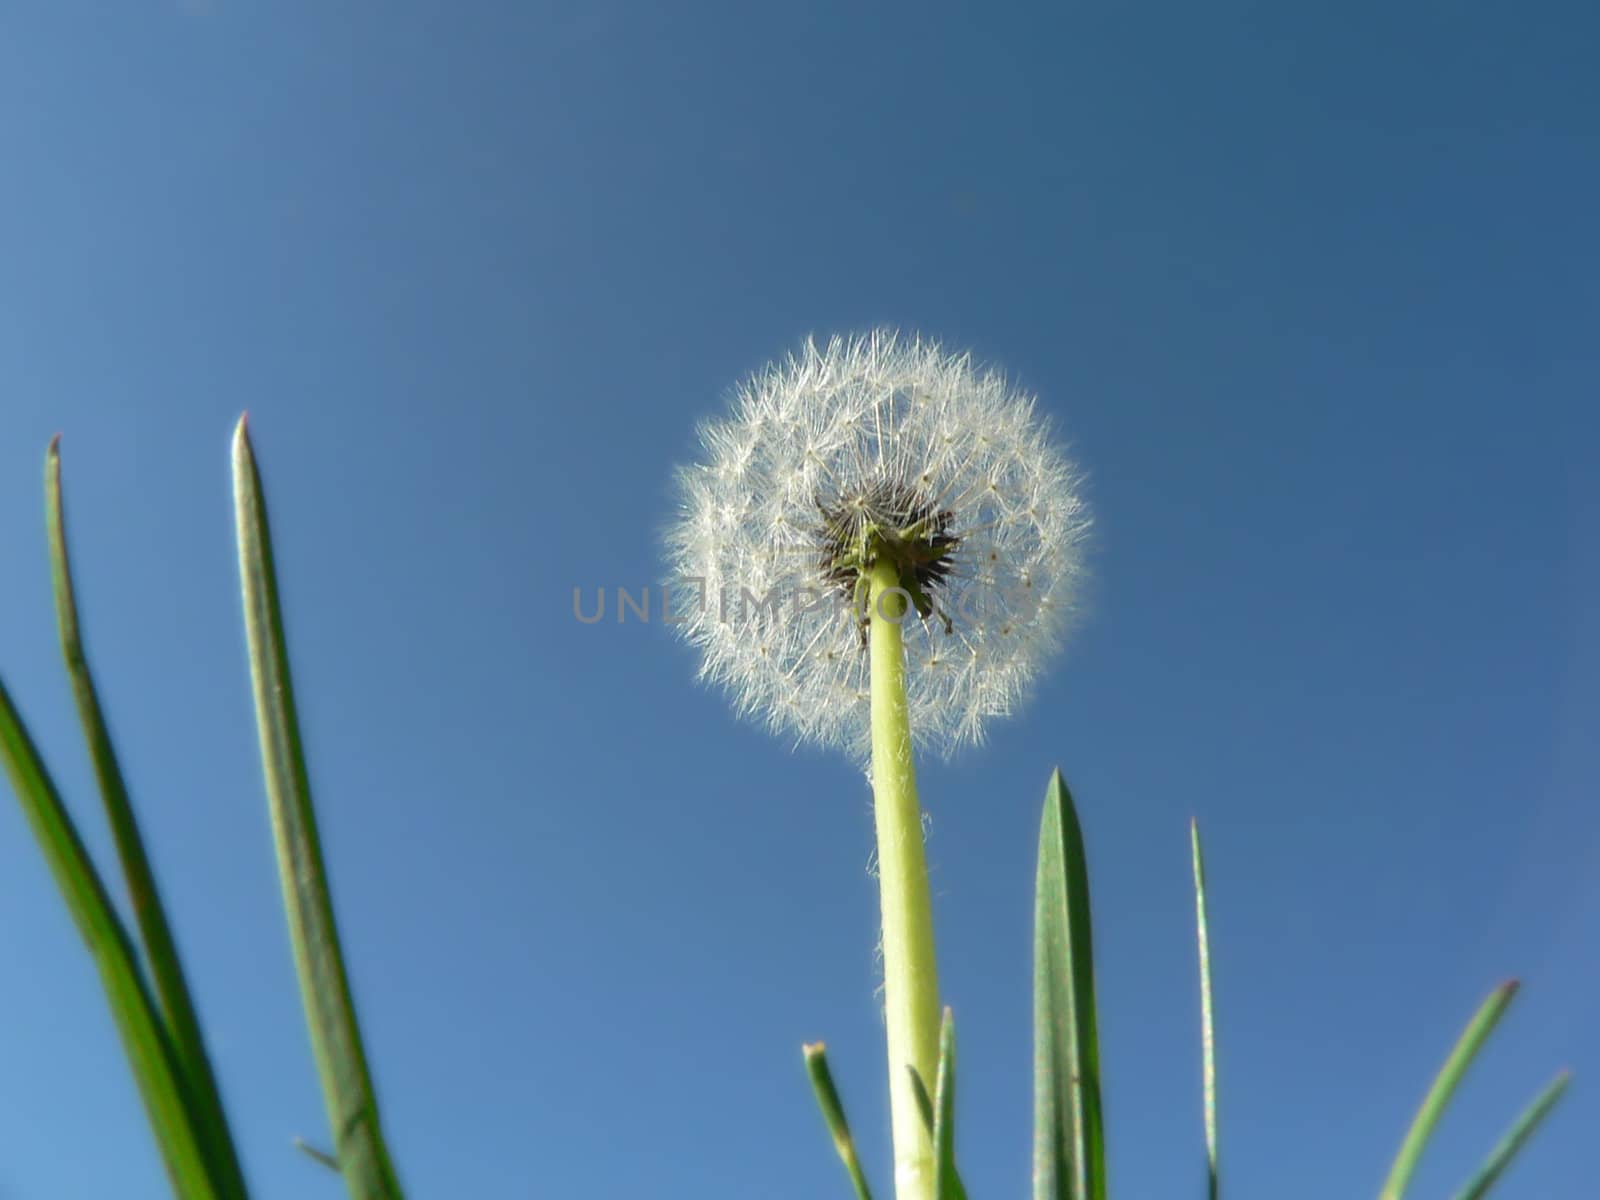 Sky and Dandelion by telecast